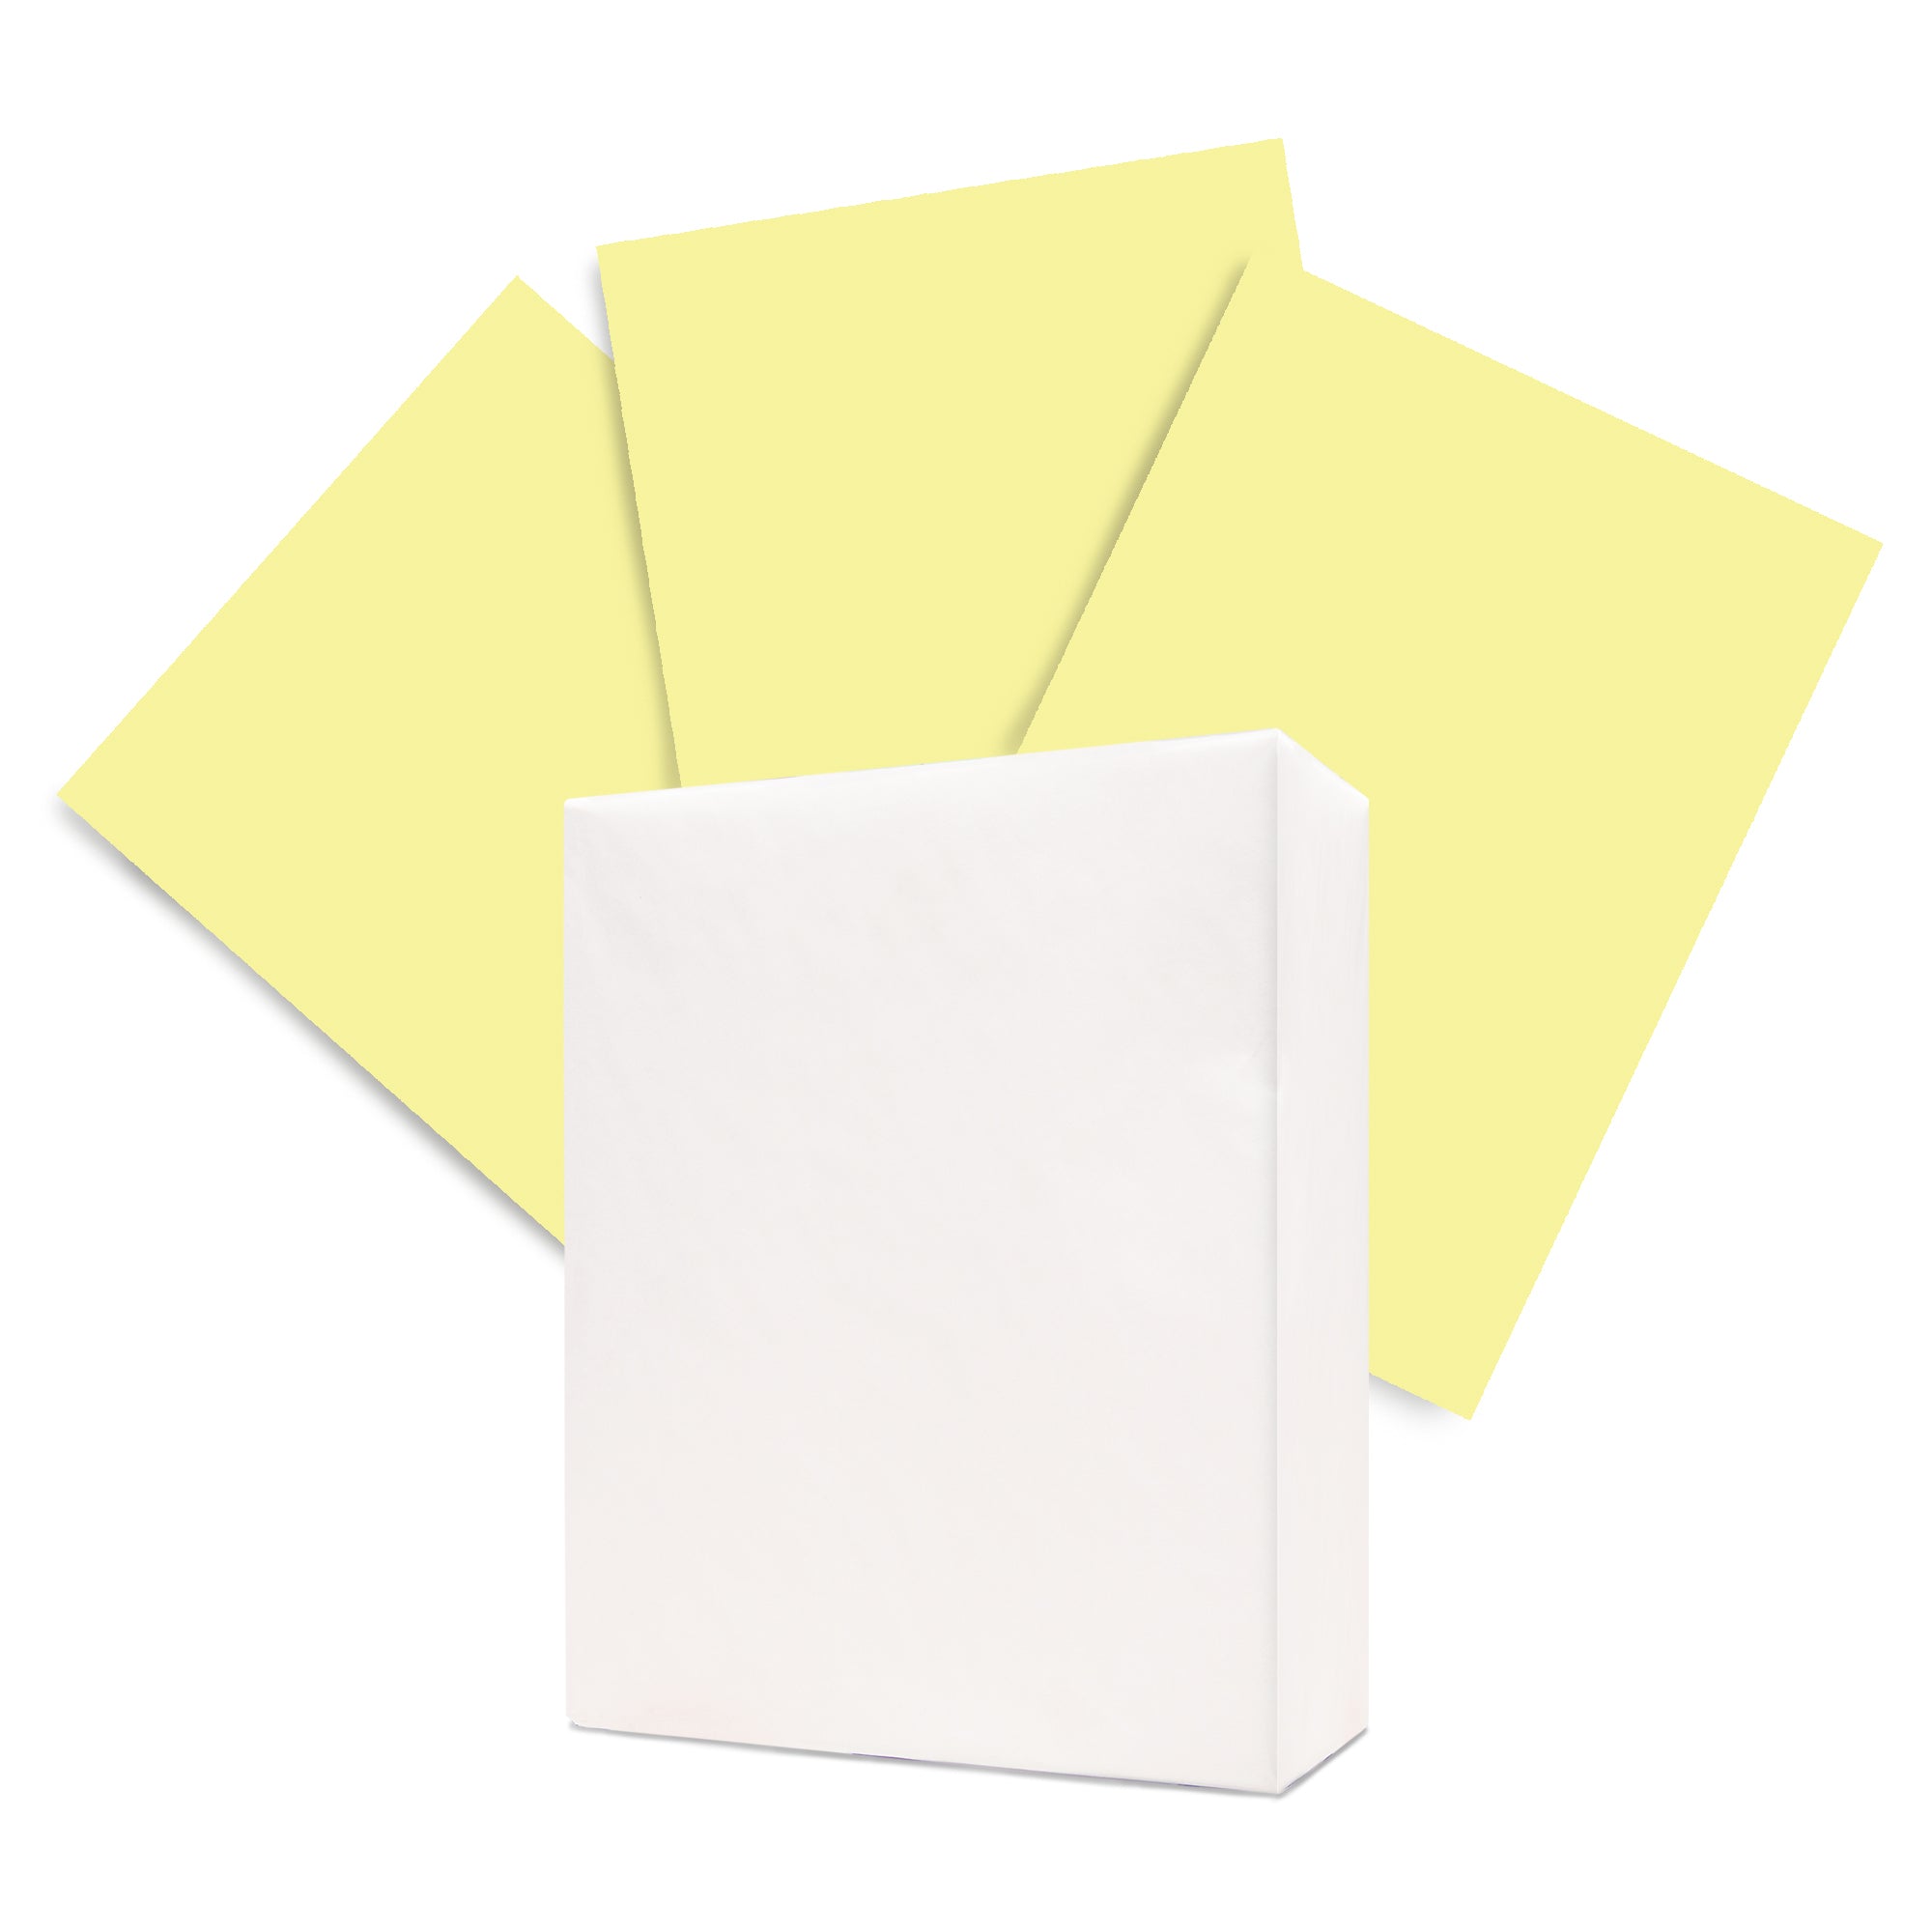 The Business Form Supplies Shop 8-1/2 x 11 Pre-Collated 20#Colored Paper, 1670 White / Canary / Pink Sets (Carton of 5010 Sheets)